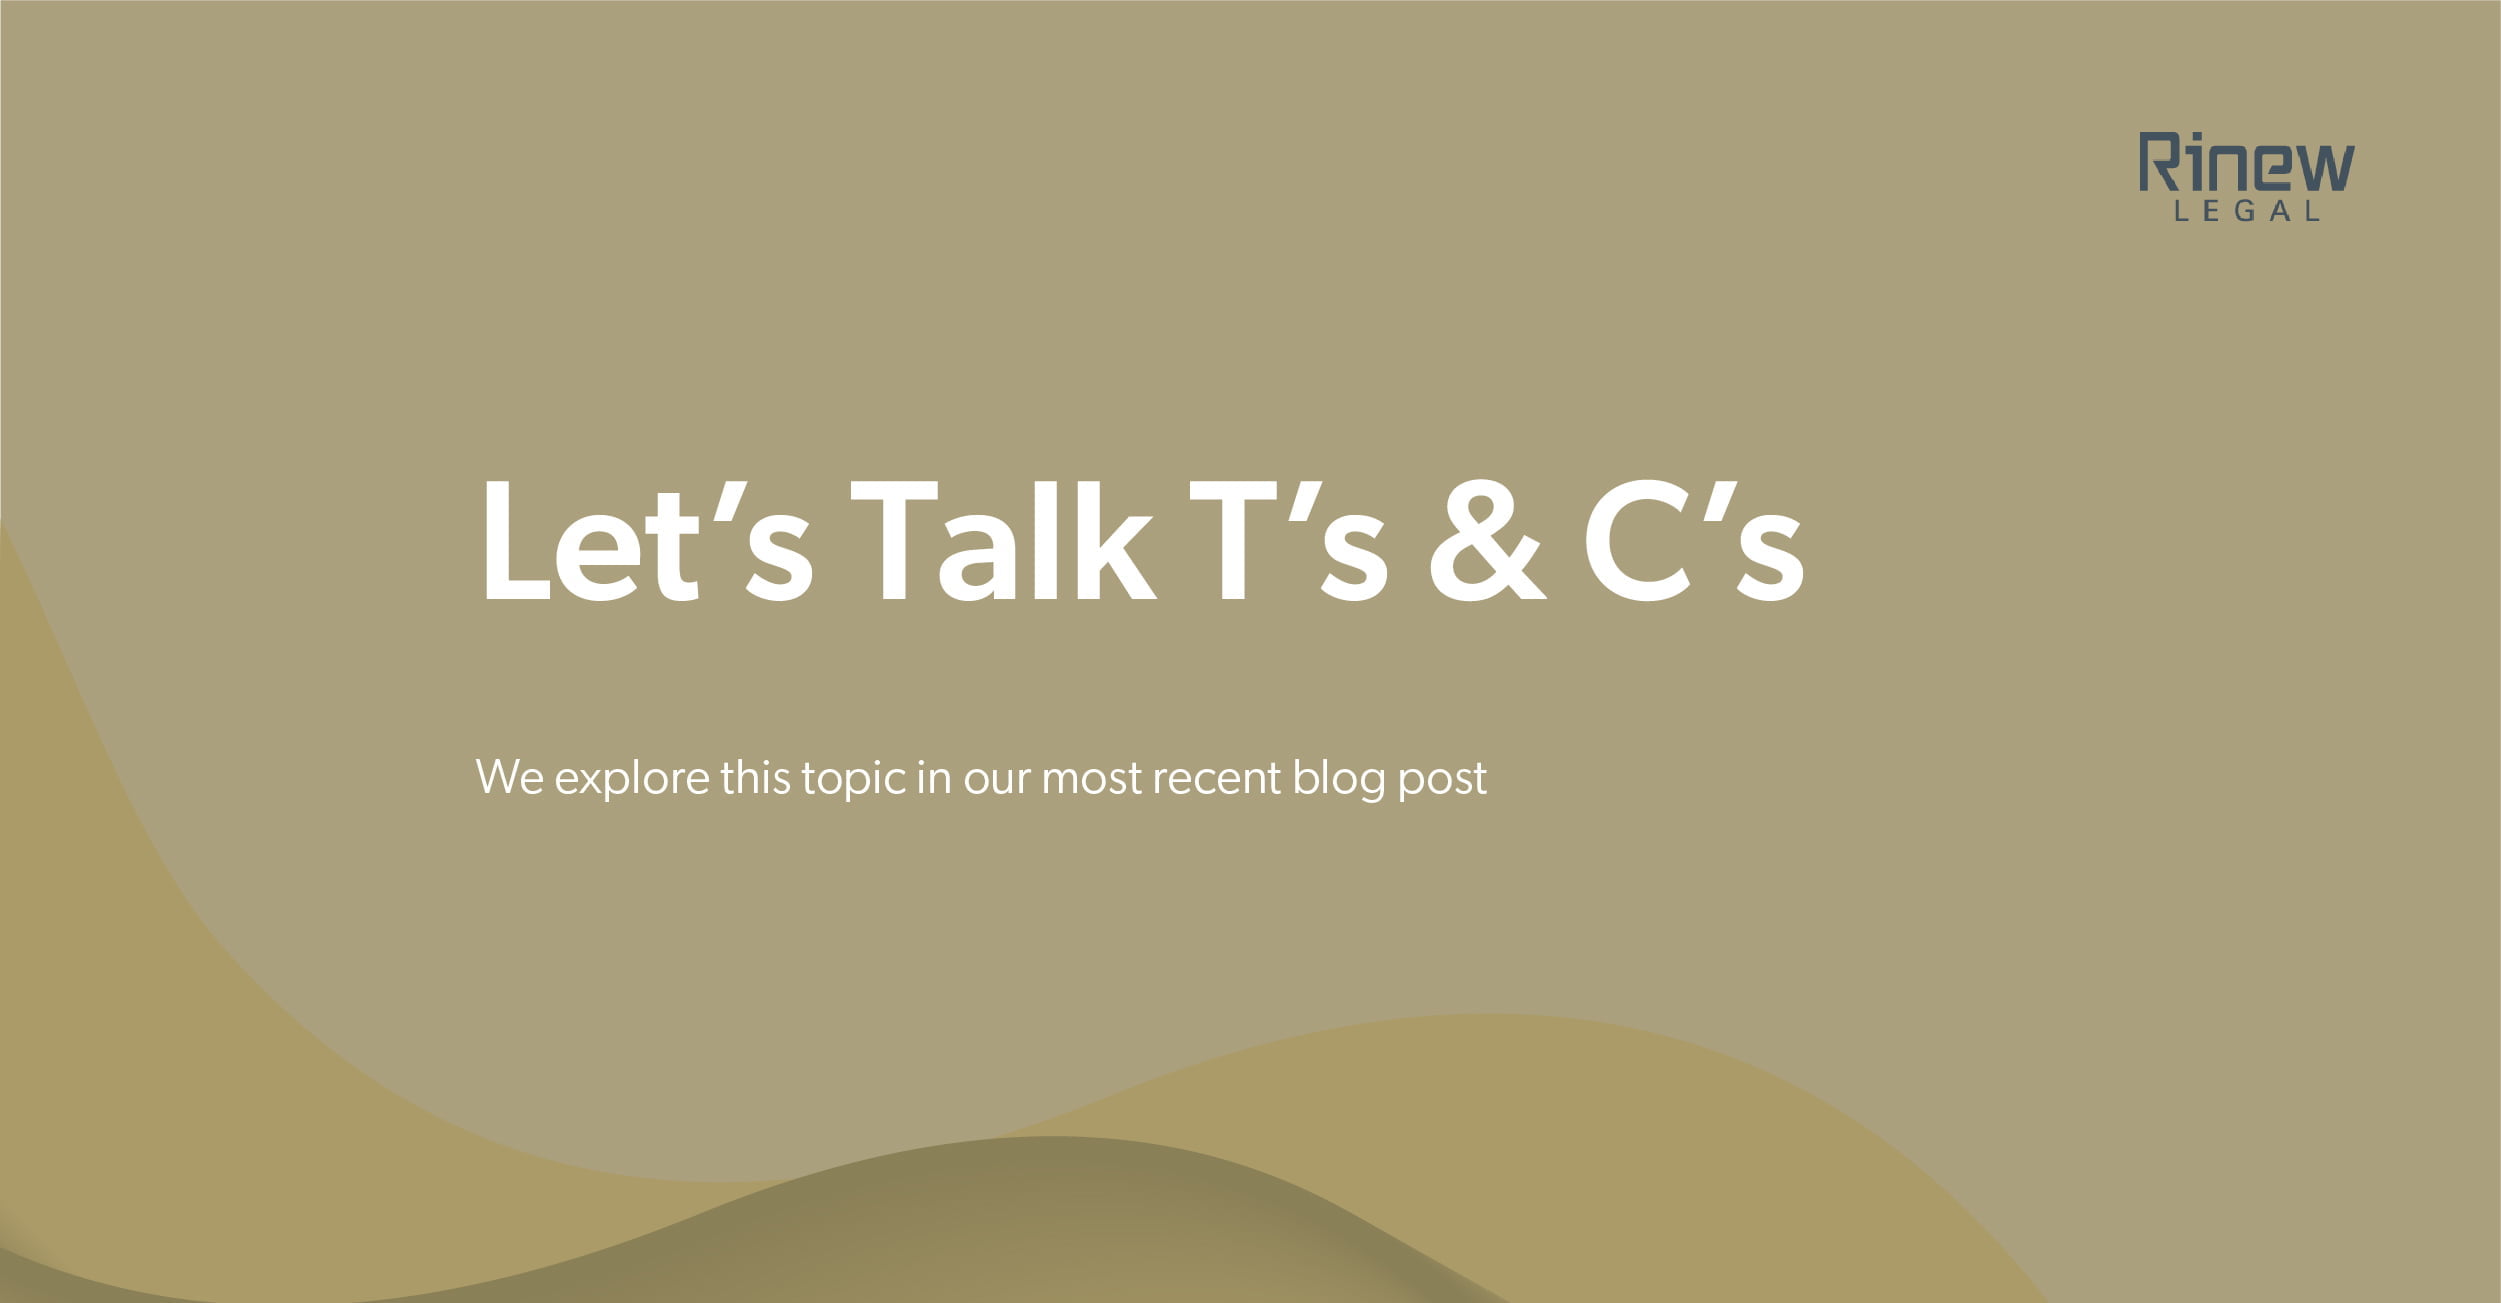 Featured image for “LET’S TALK T’s & C’s”